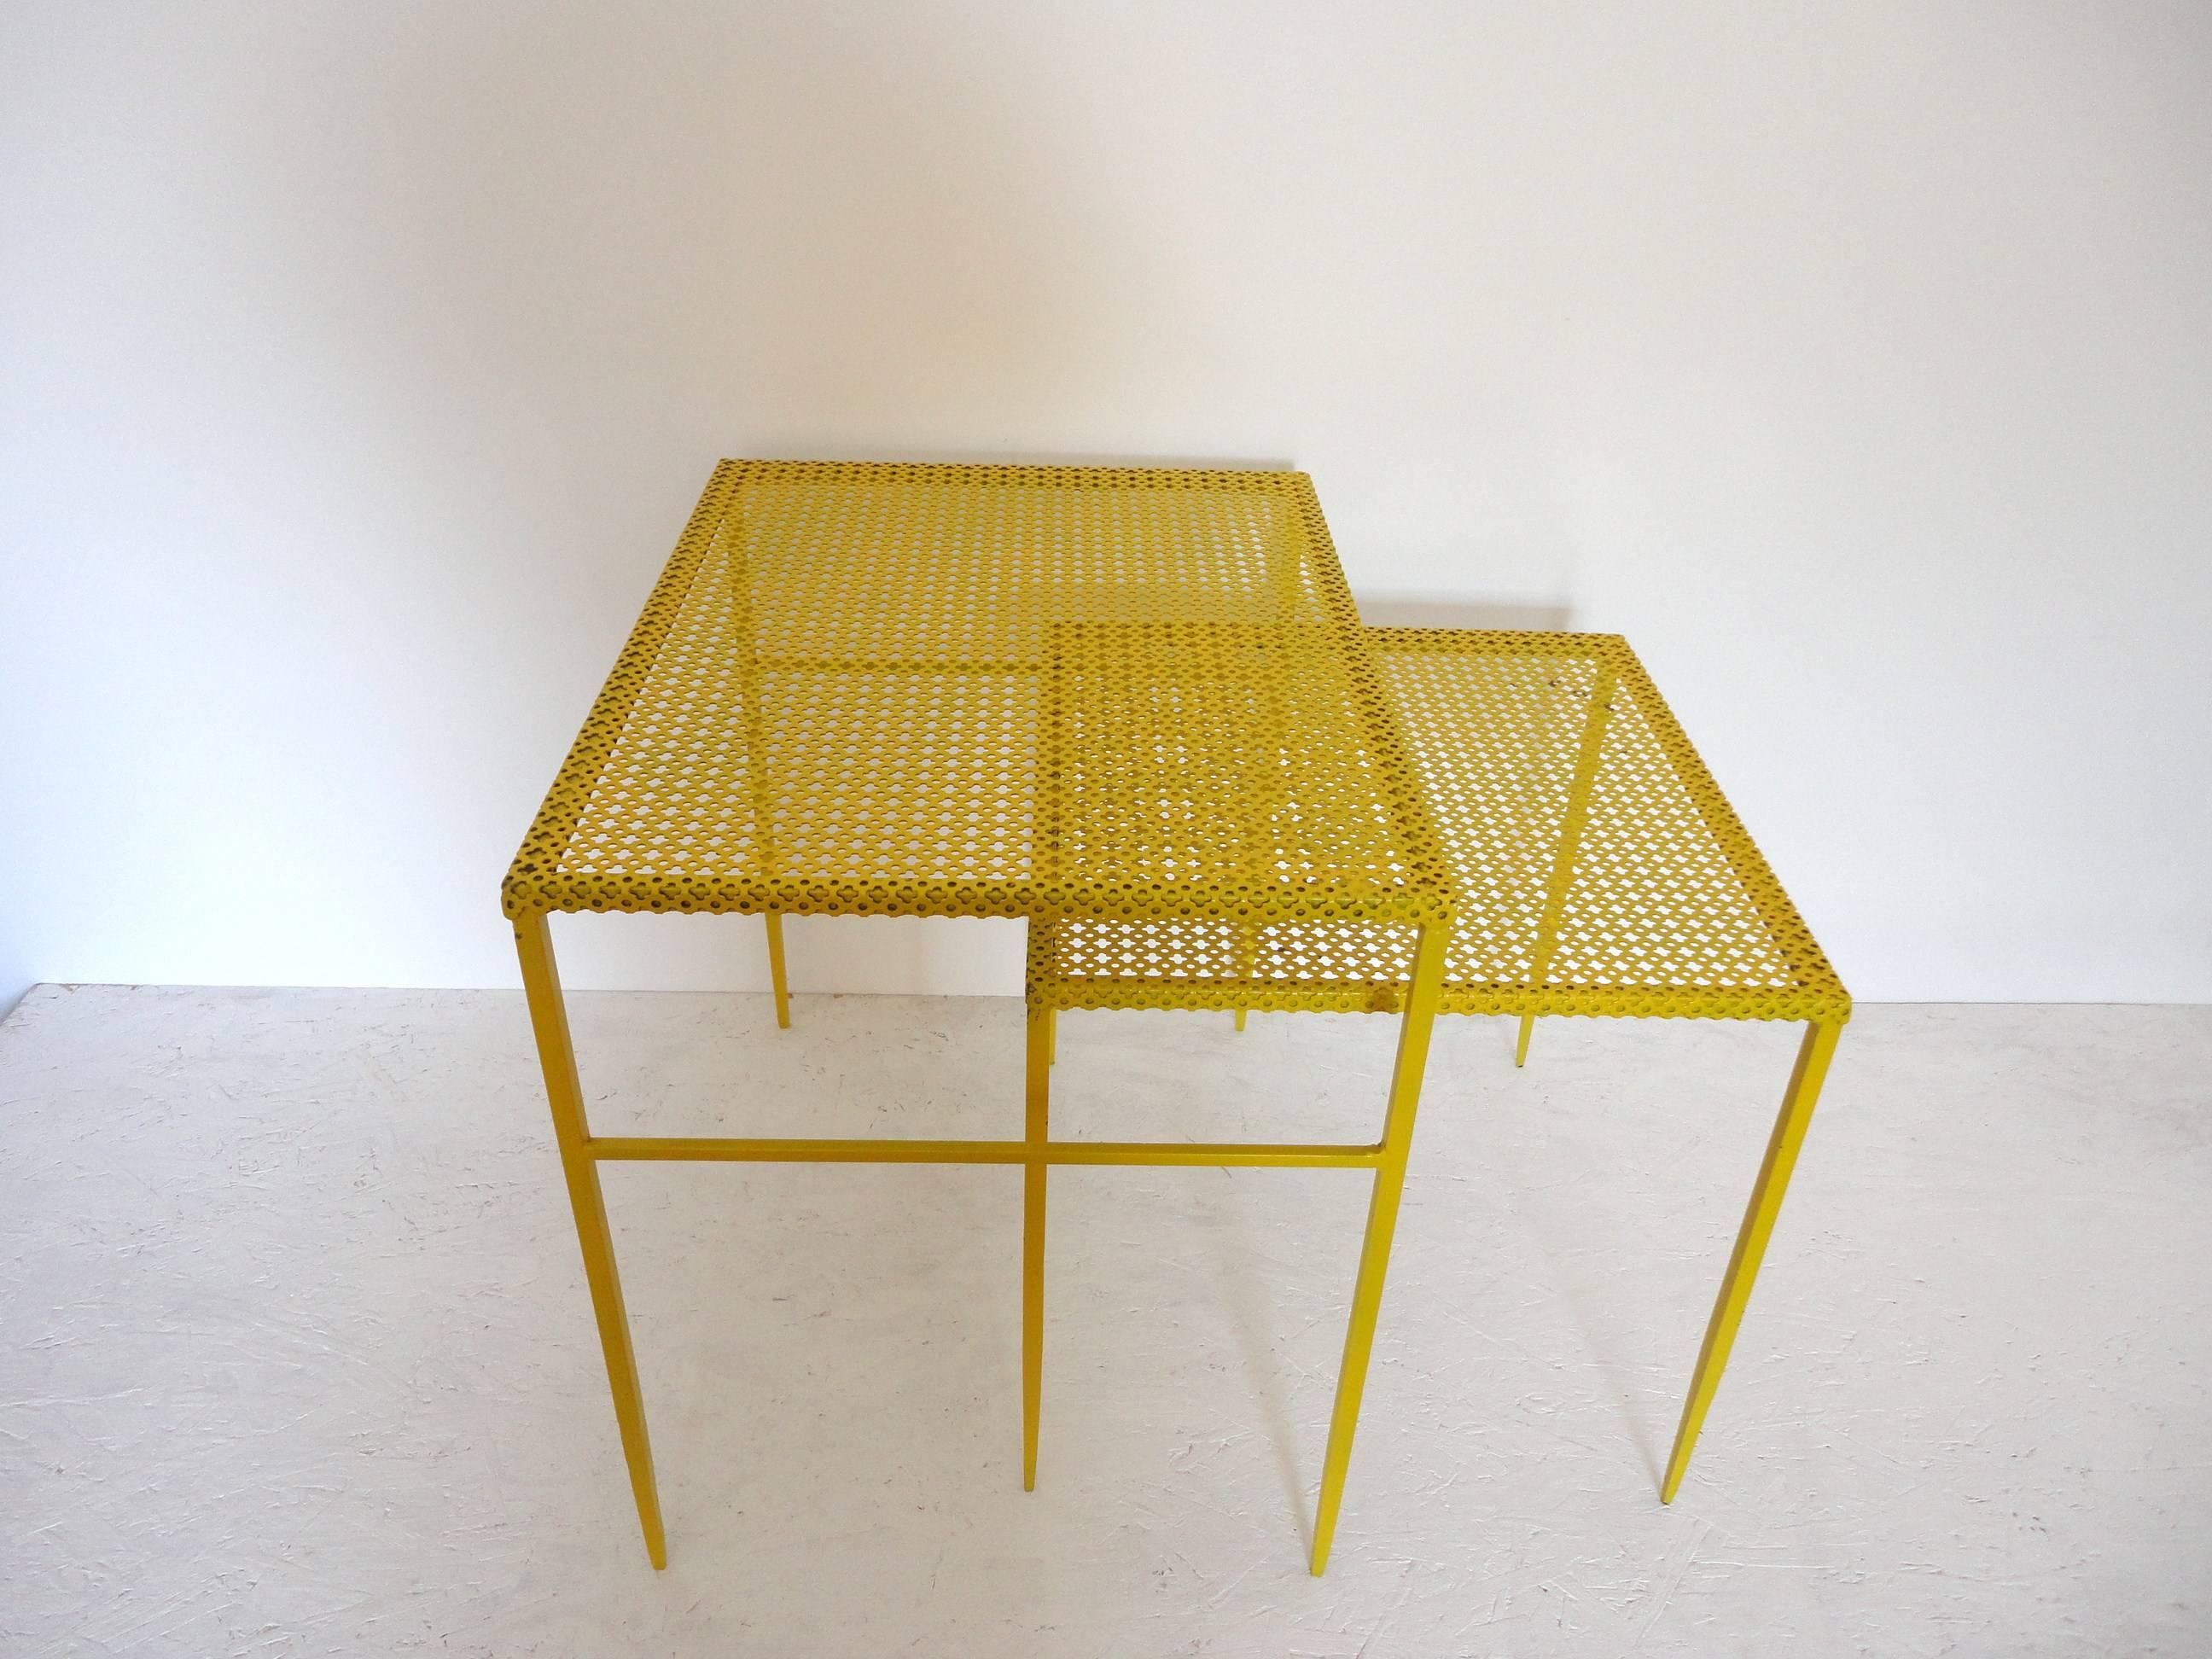 Set of two end tables by Mathieu Mategot. 
Perforated lacquered metal. 
Documented in the book "Mathieu Mategot" Patrick Favardin page 50. 
The larger table measures 52 x 53 x 42.5 cm. The smaller table measures 42.5 x 43 x 43 cm.
 